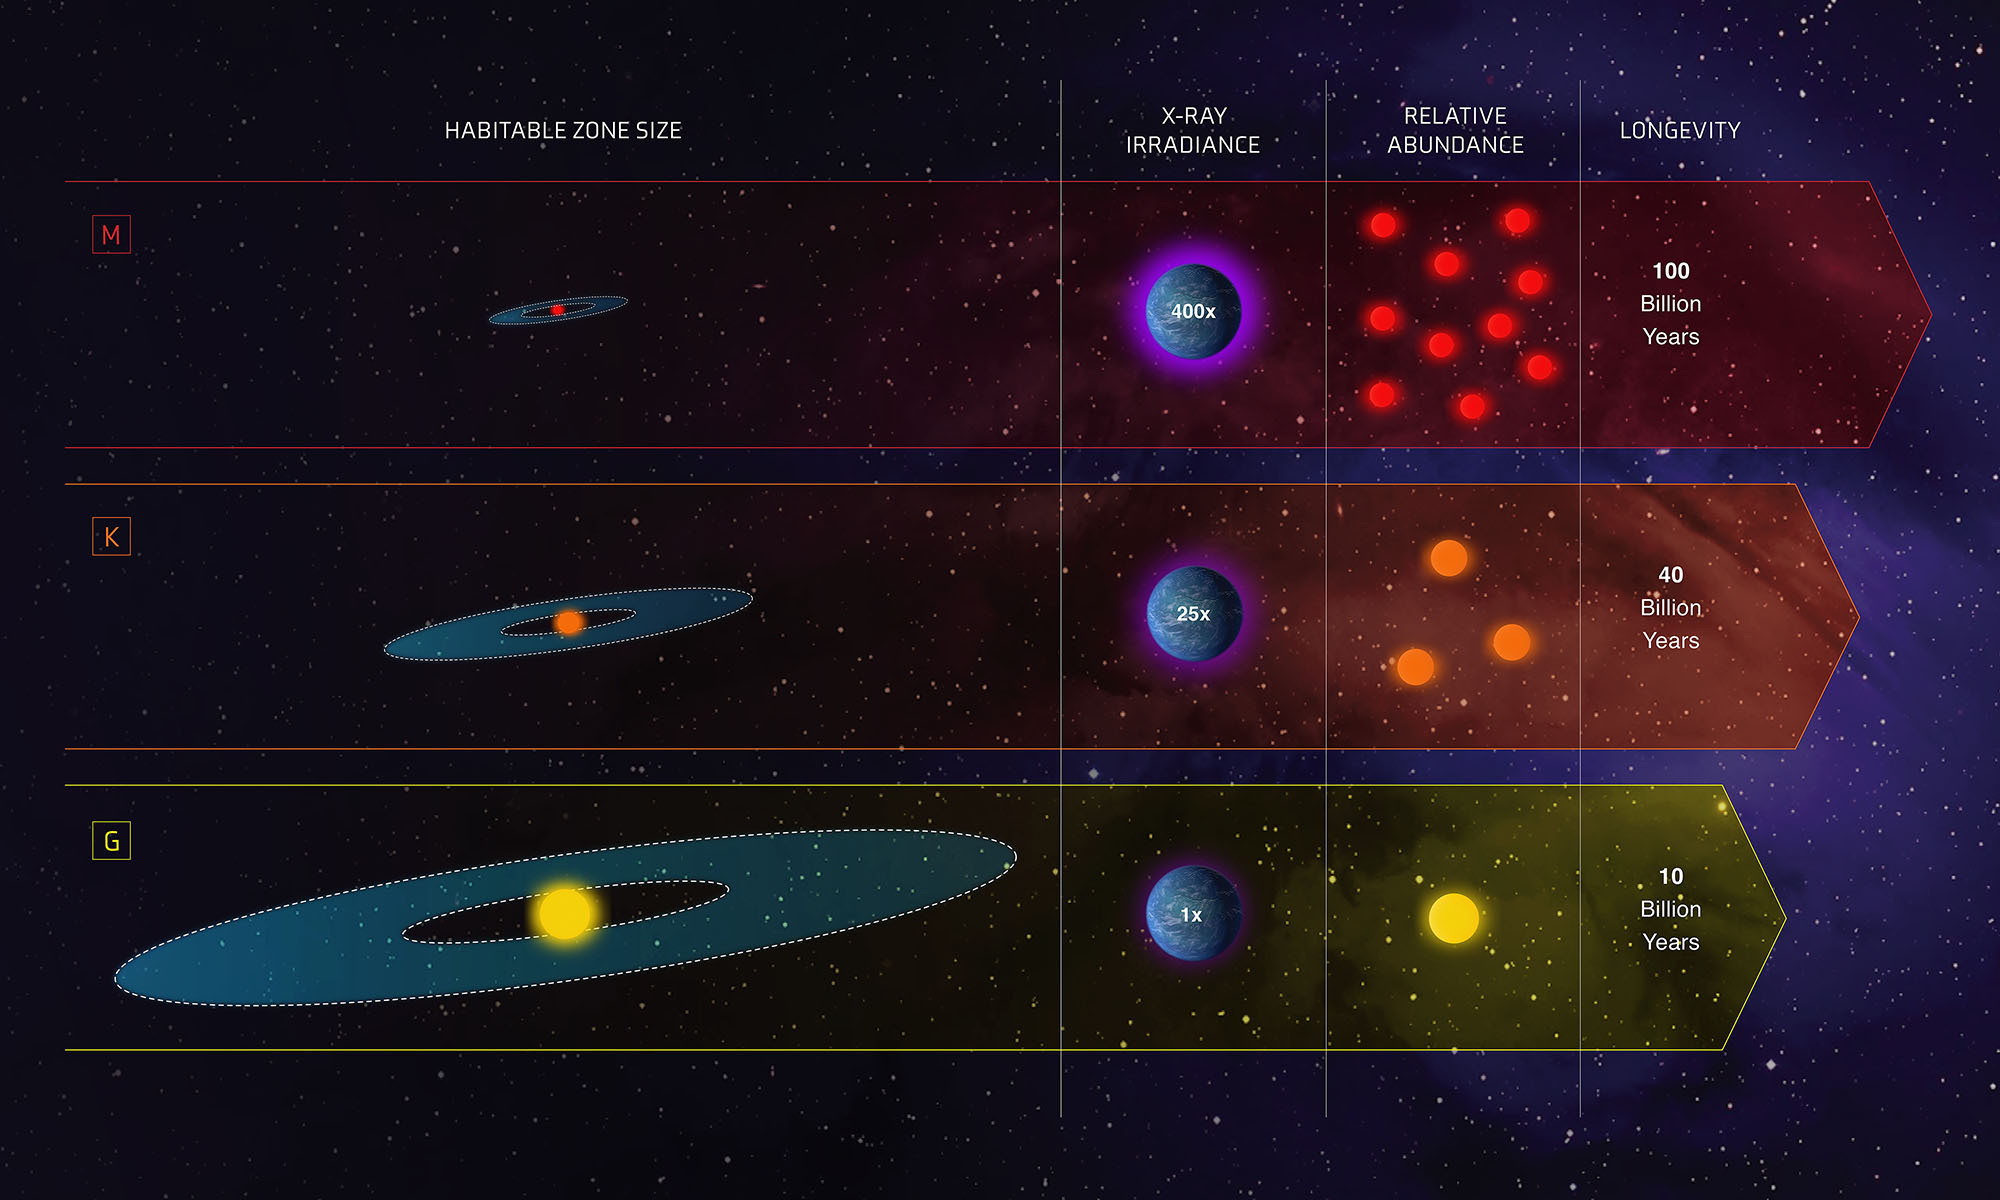 infographic comparing 3 classes of stars in our galaxy